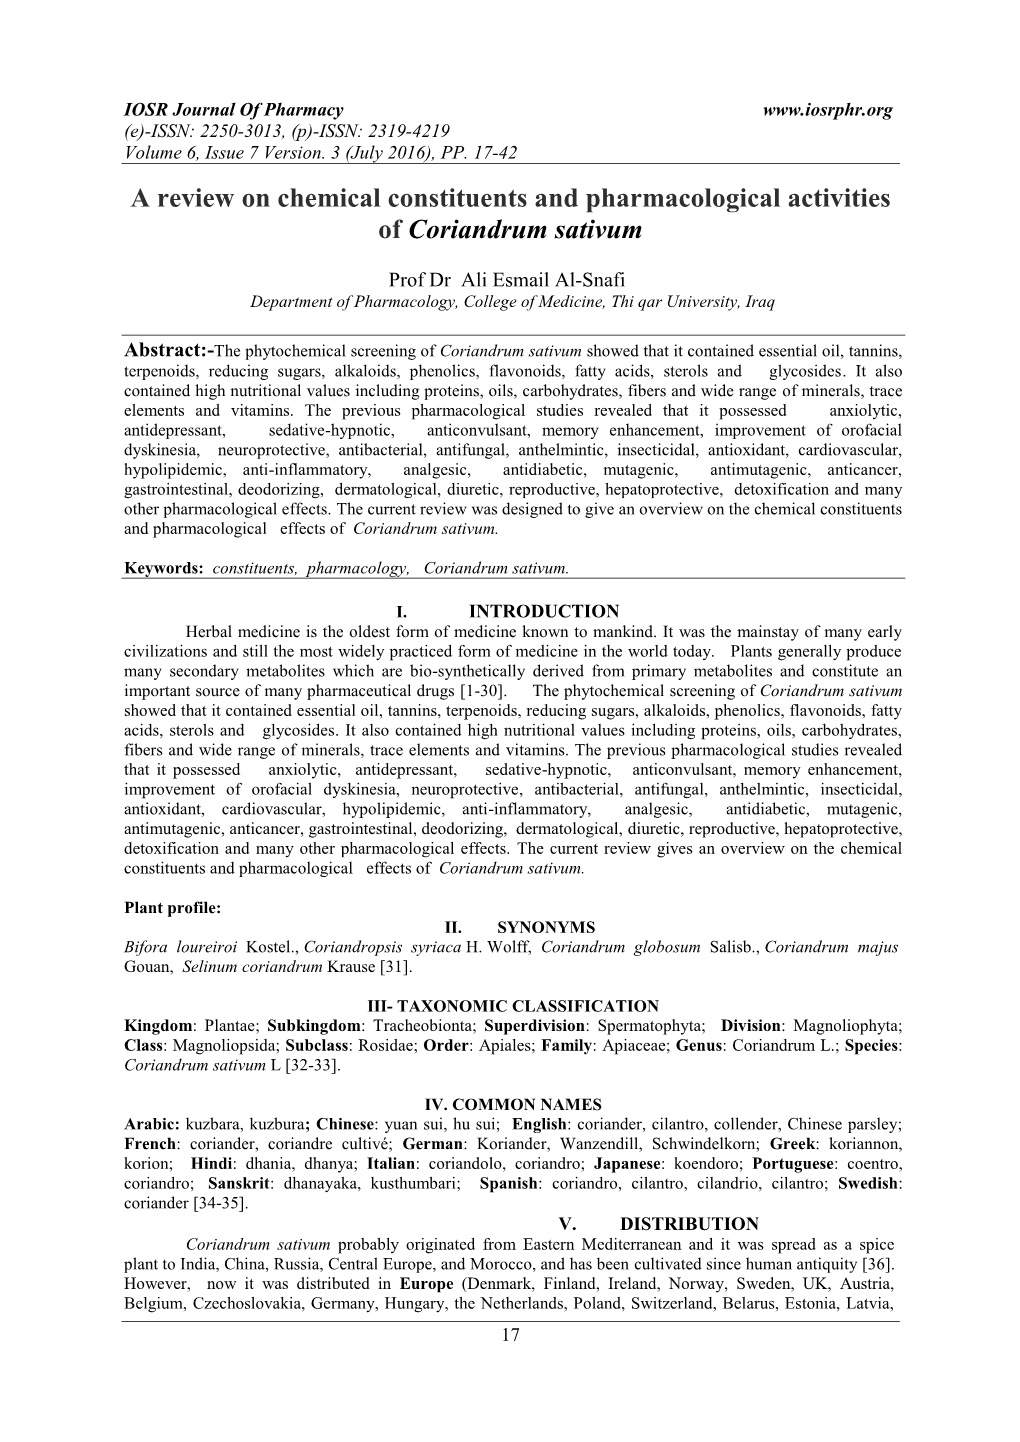 A Review on Chemical Constituents and Pharmacological Activities of Coriandrum Sativum